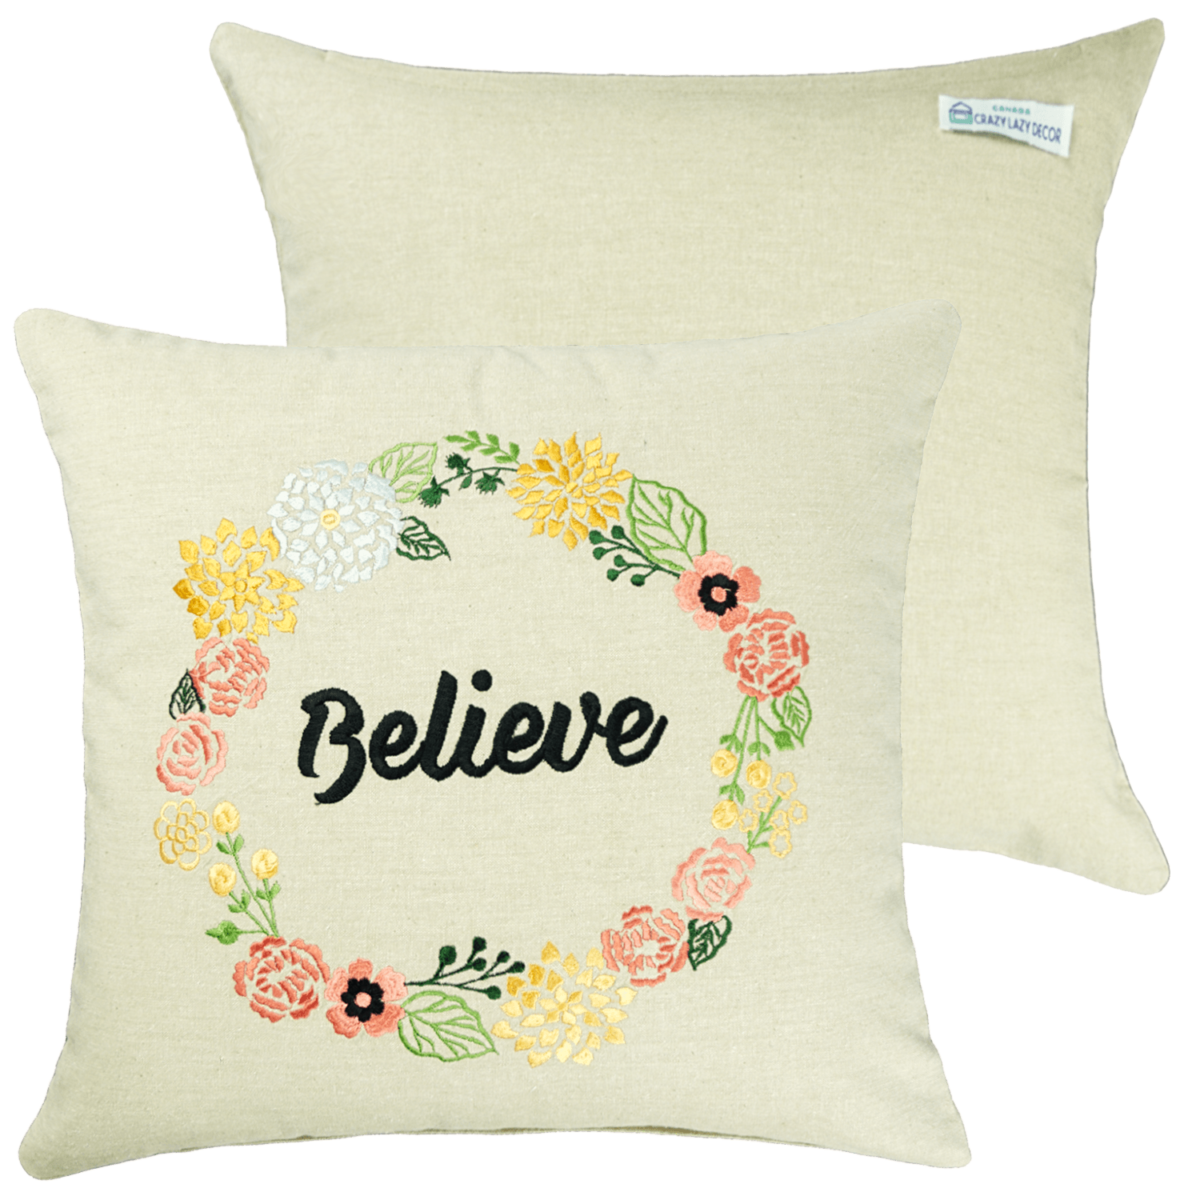 Embroidered flower decorative pillow 16" X 16"